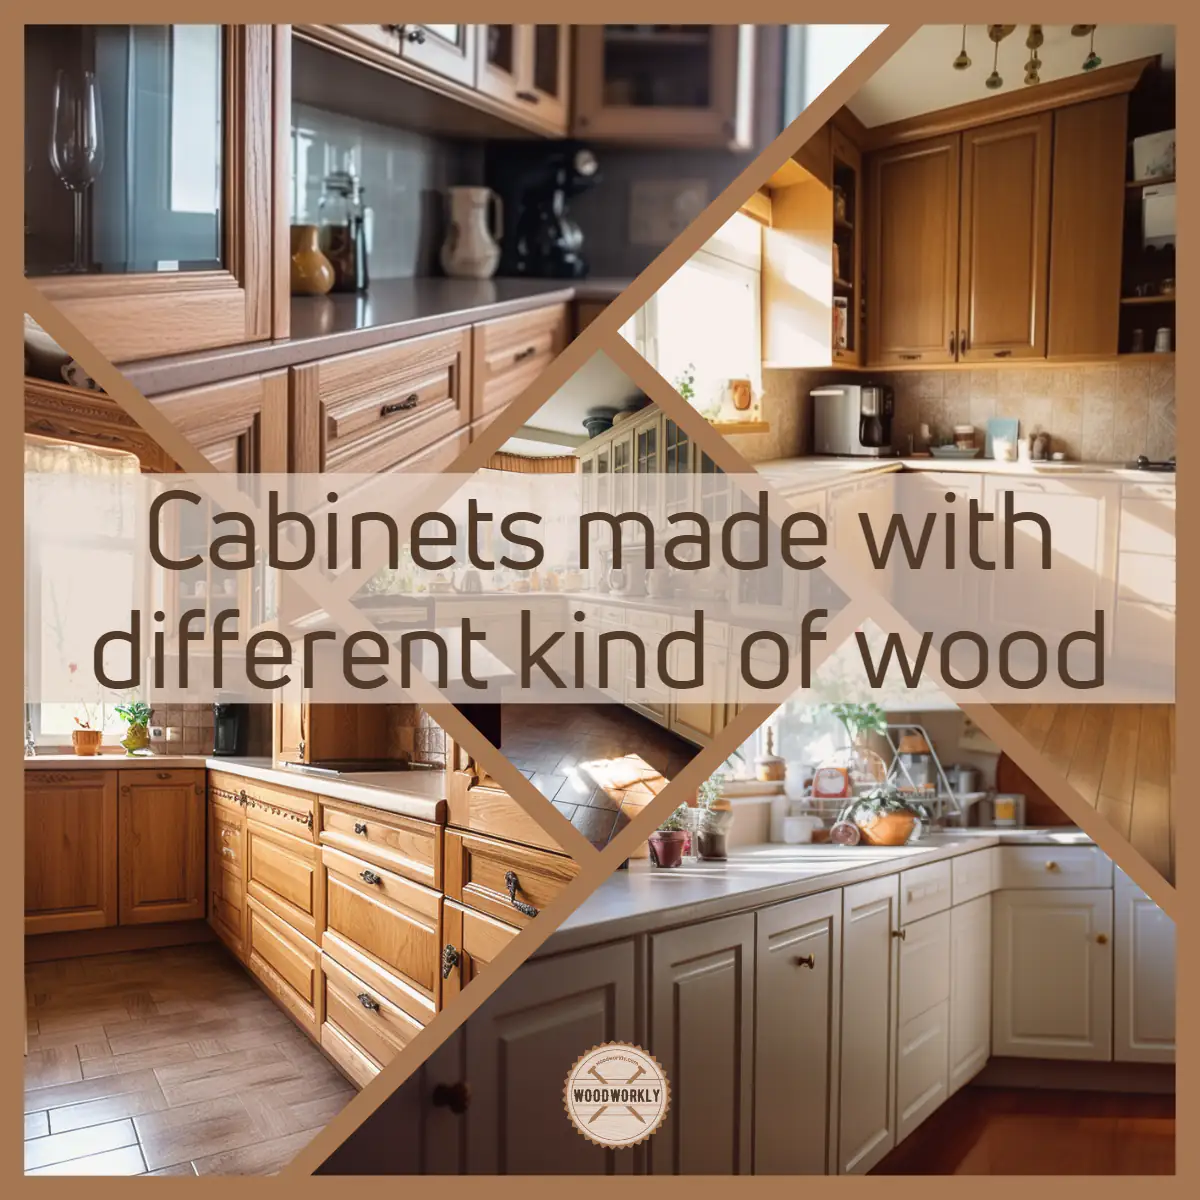 Cabinets made with different kind of wood